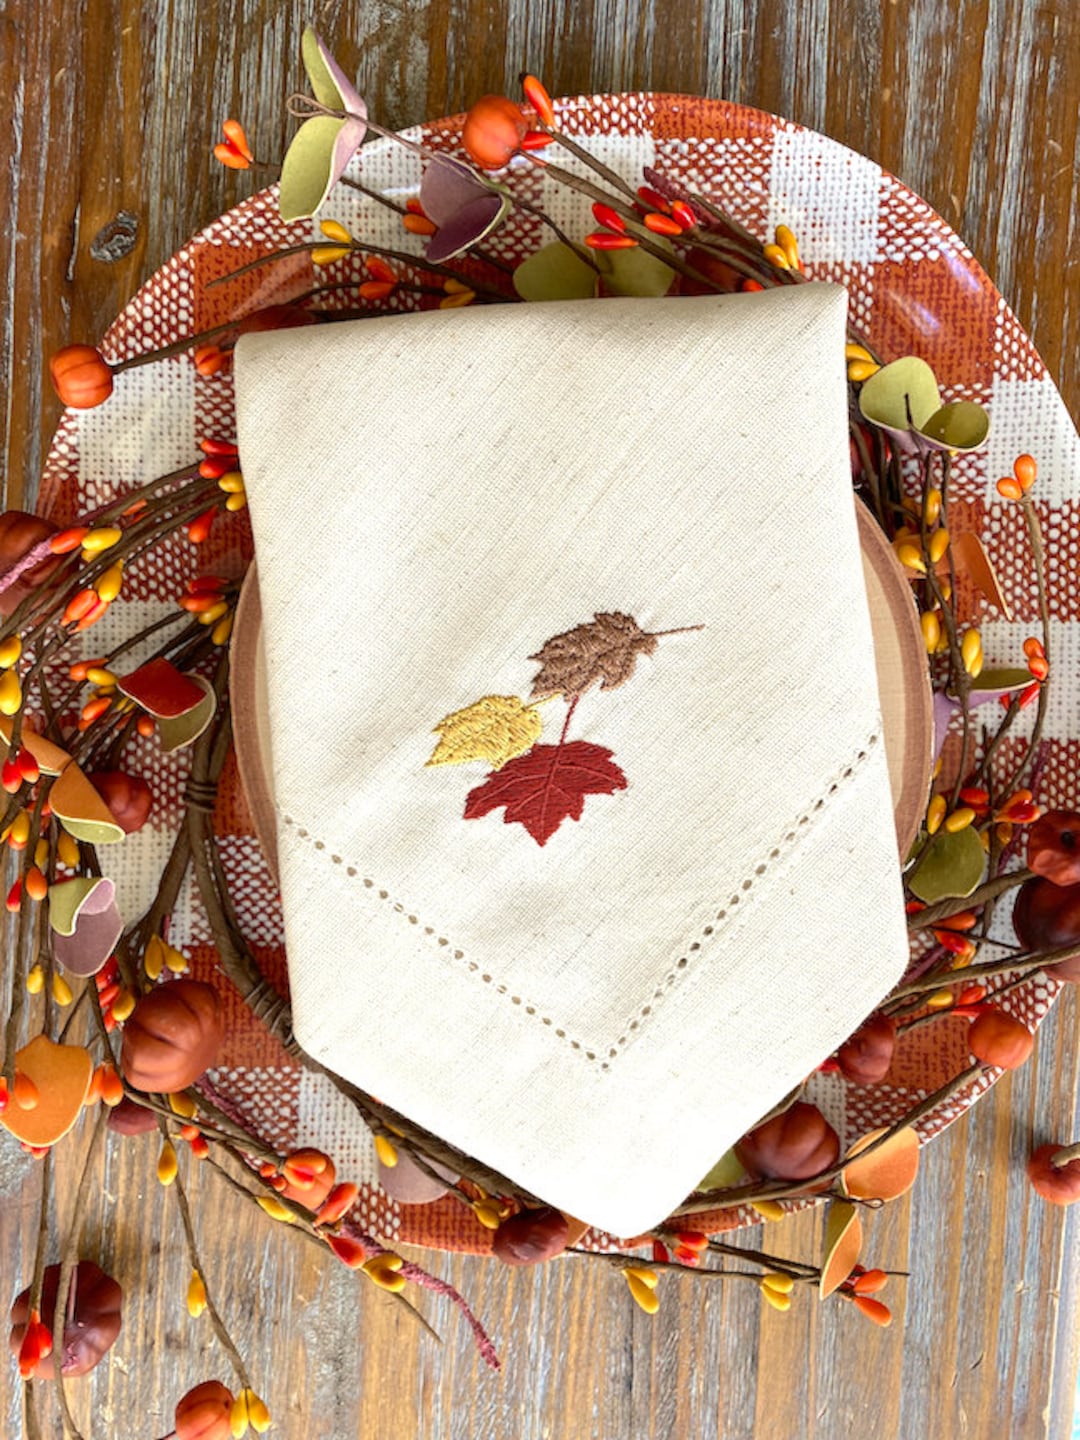 Autumn Cloth Napkins Set a pretty table everyday with these 100% cotton,  machine wash and dry (no iron) made in Georgia